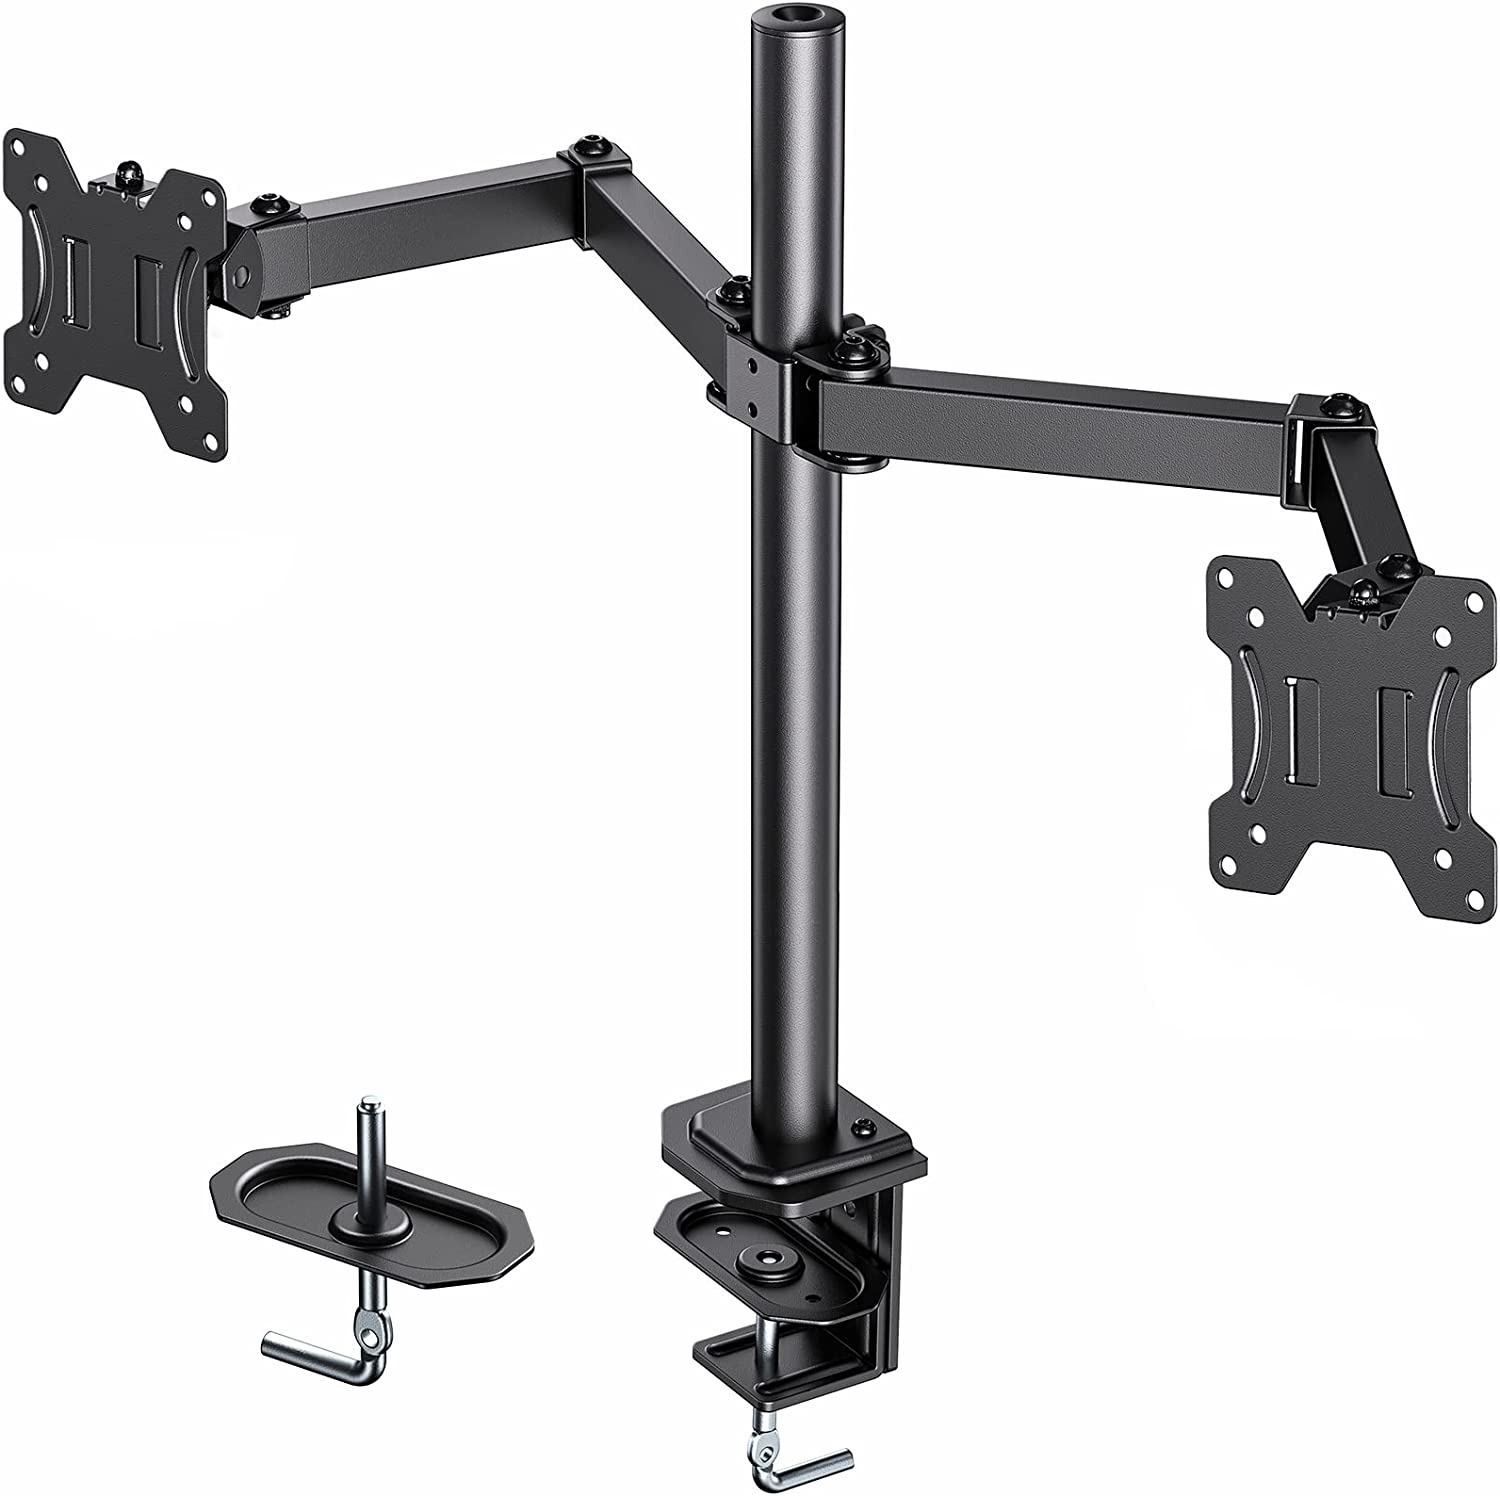 Huanuo Dual Monitor Stand w/ C Clamp & Base for 13 to 27" Monitors $15.17 + Free Shipping